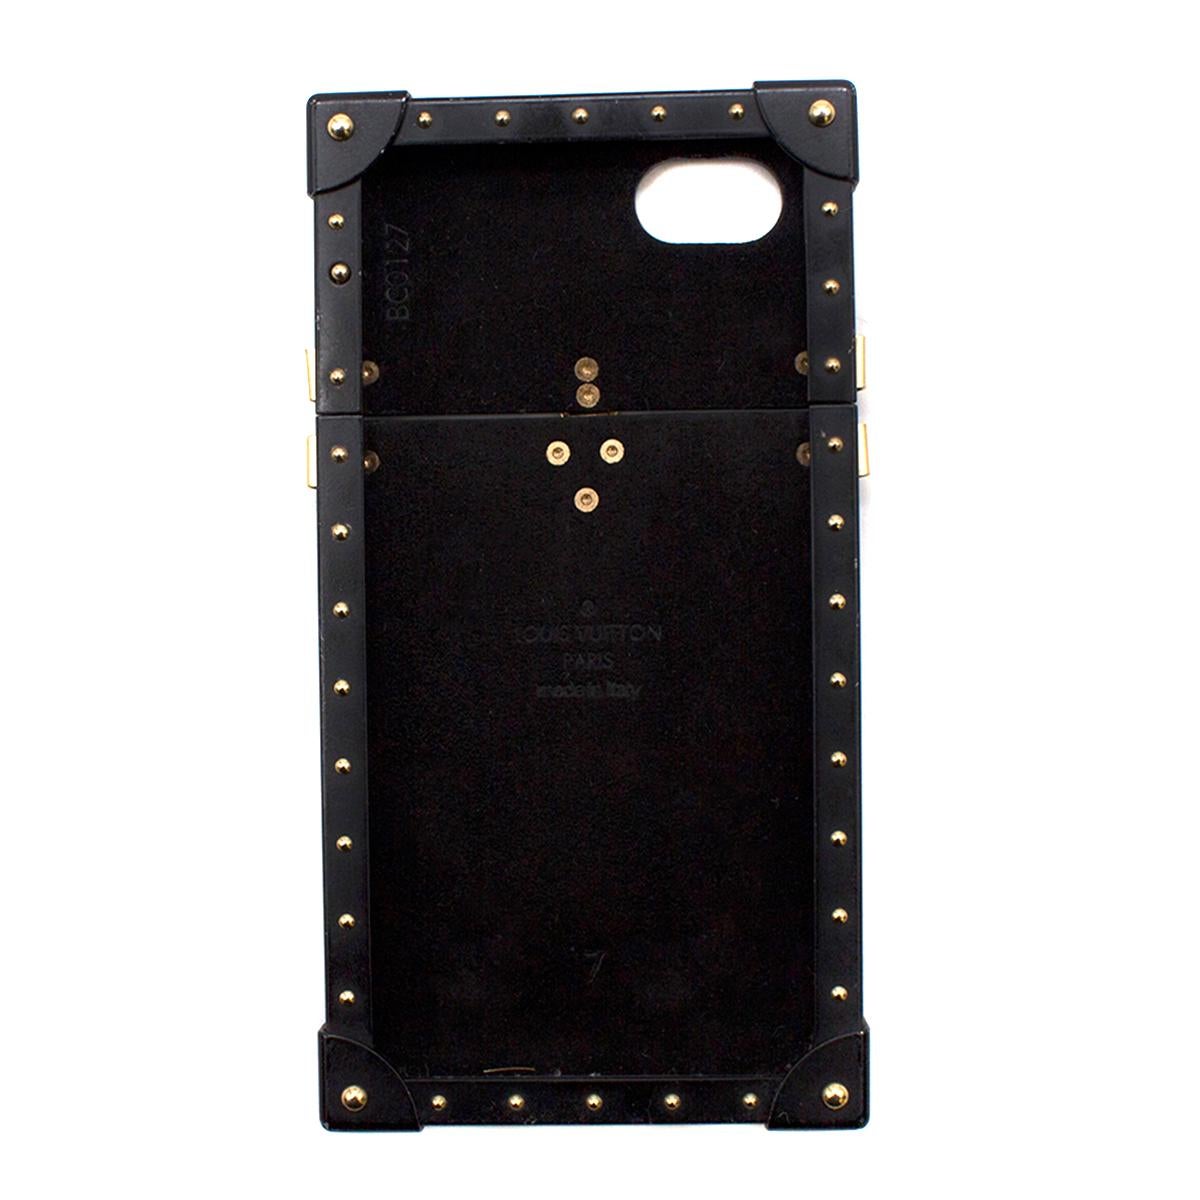 Louis Vuitton Eye-Trunk iPhone 6 & 6s holder 

- Tonal-brown Monogram print, coated canvas 
- Trunk shaped hard iPhone case
- Black metal edges, gold-tone metal studs and logo-engraved faux clasp 
- Compatible with the iPhone 6 and 6s 
- Date stamp: